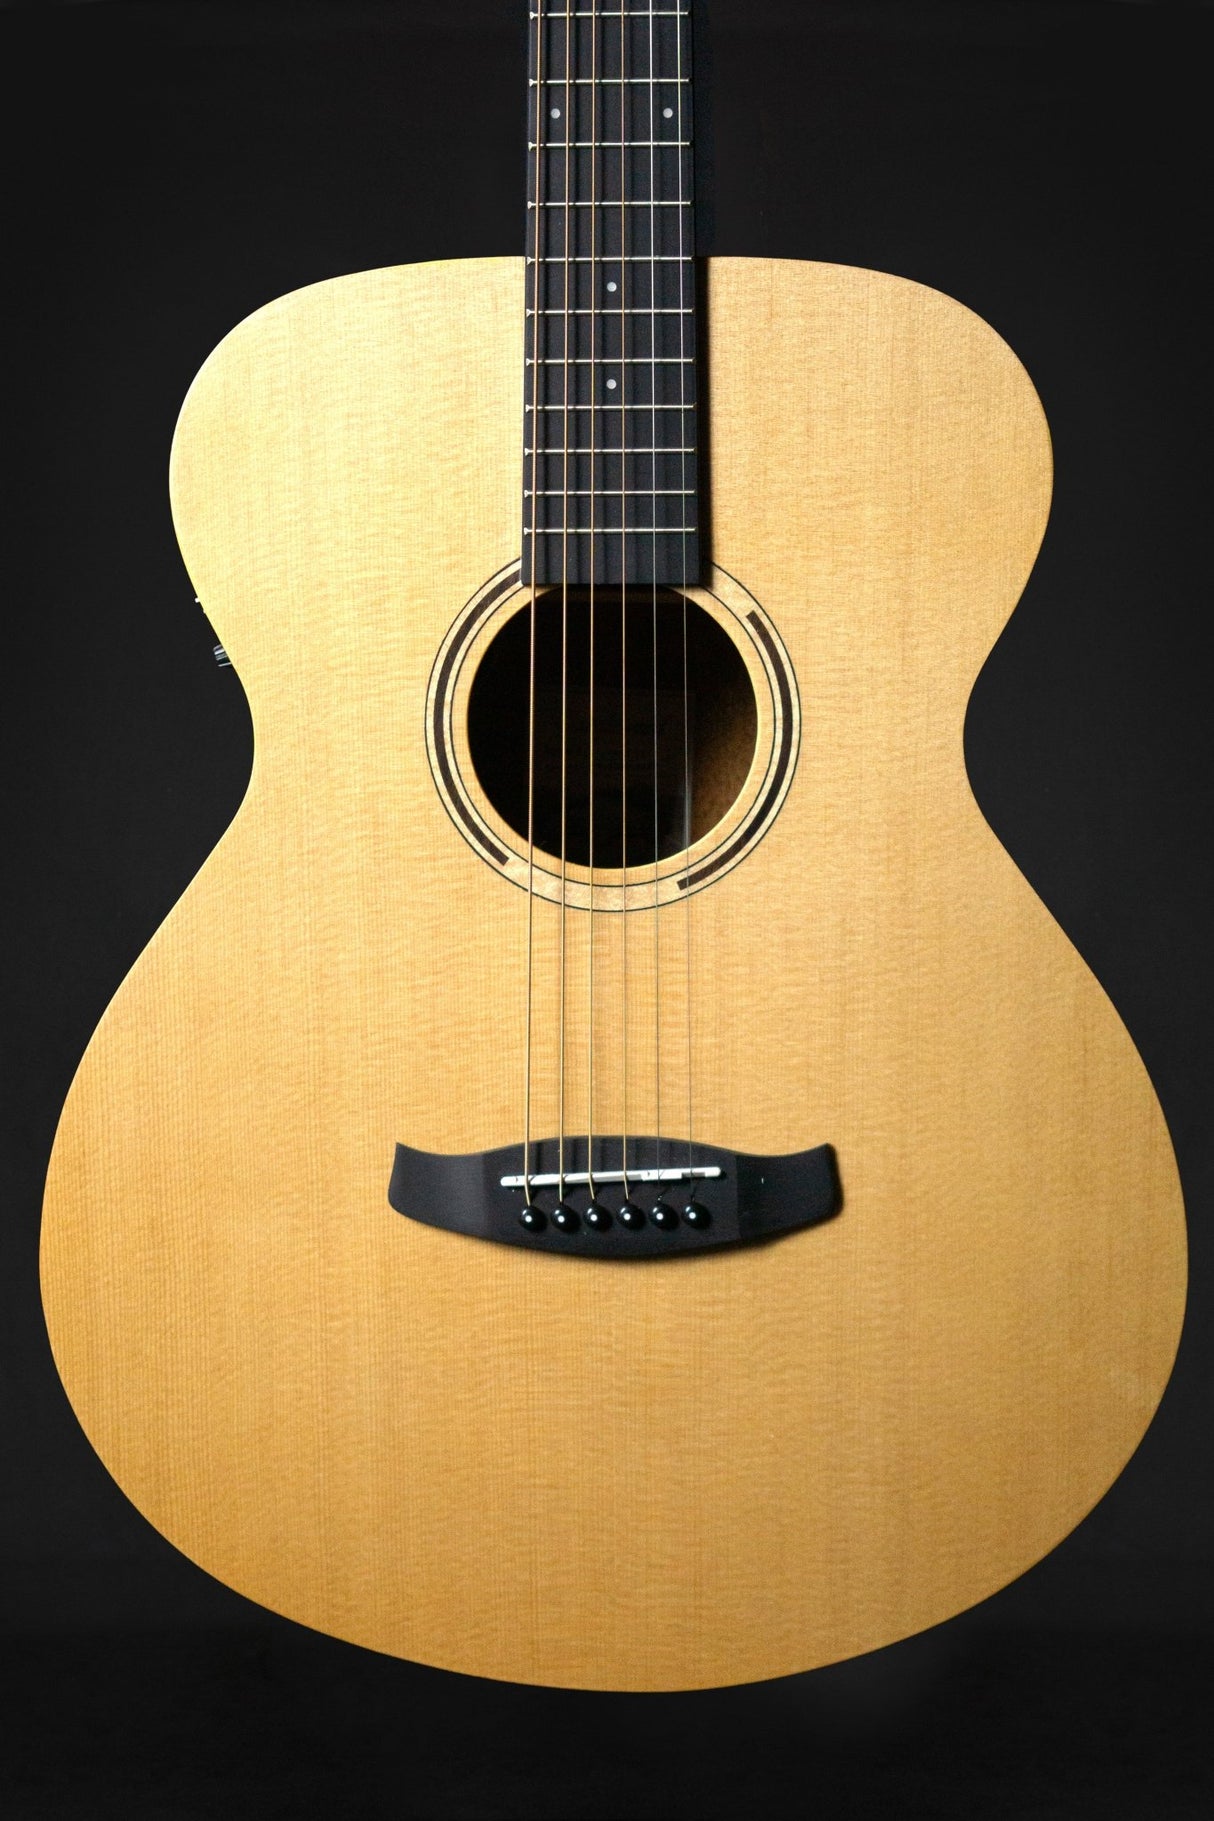 Tanglewood TWR2 OE Electro-Acoustic Guitar - Acoustic Guitars - Tanglewood